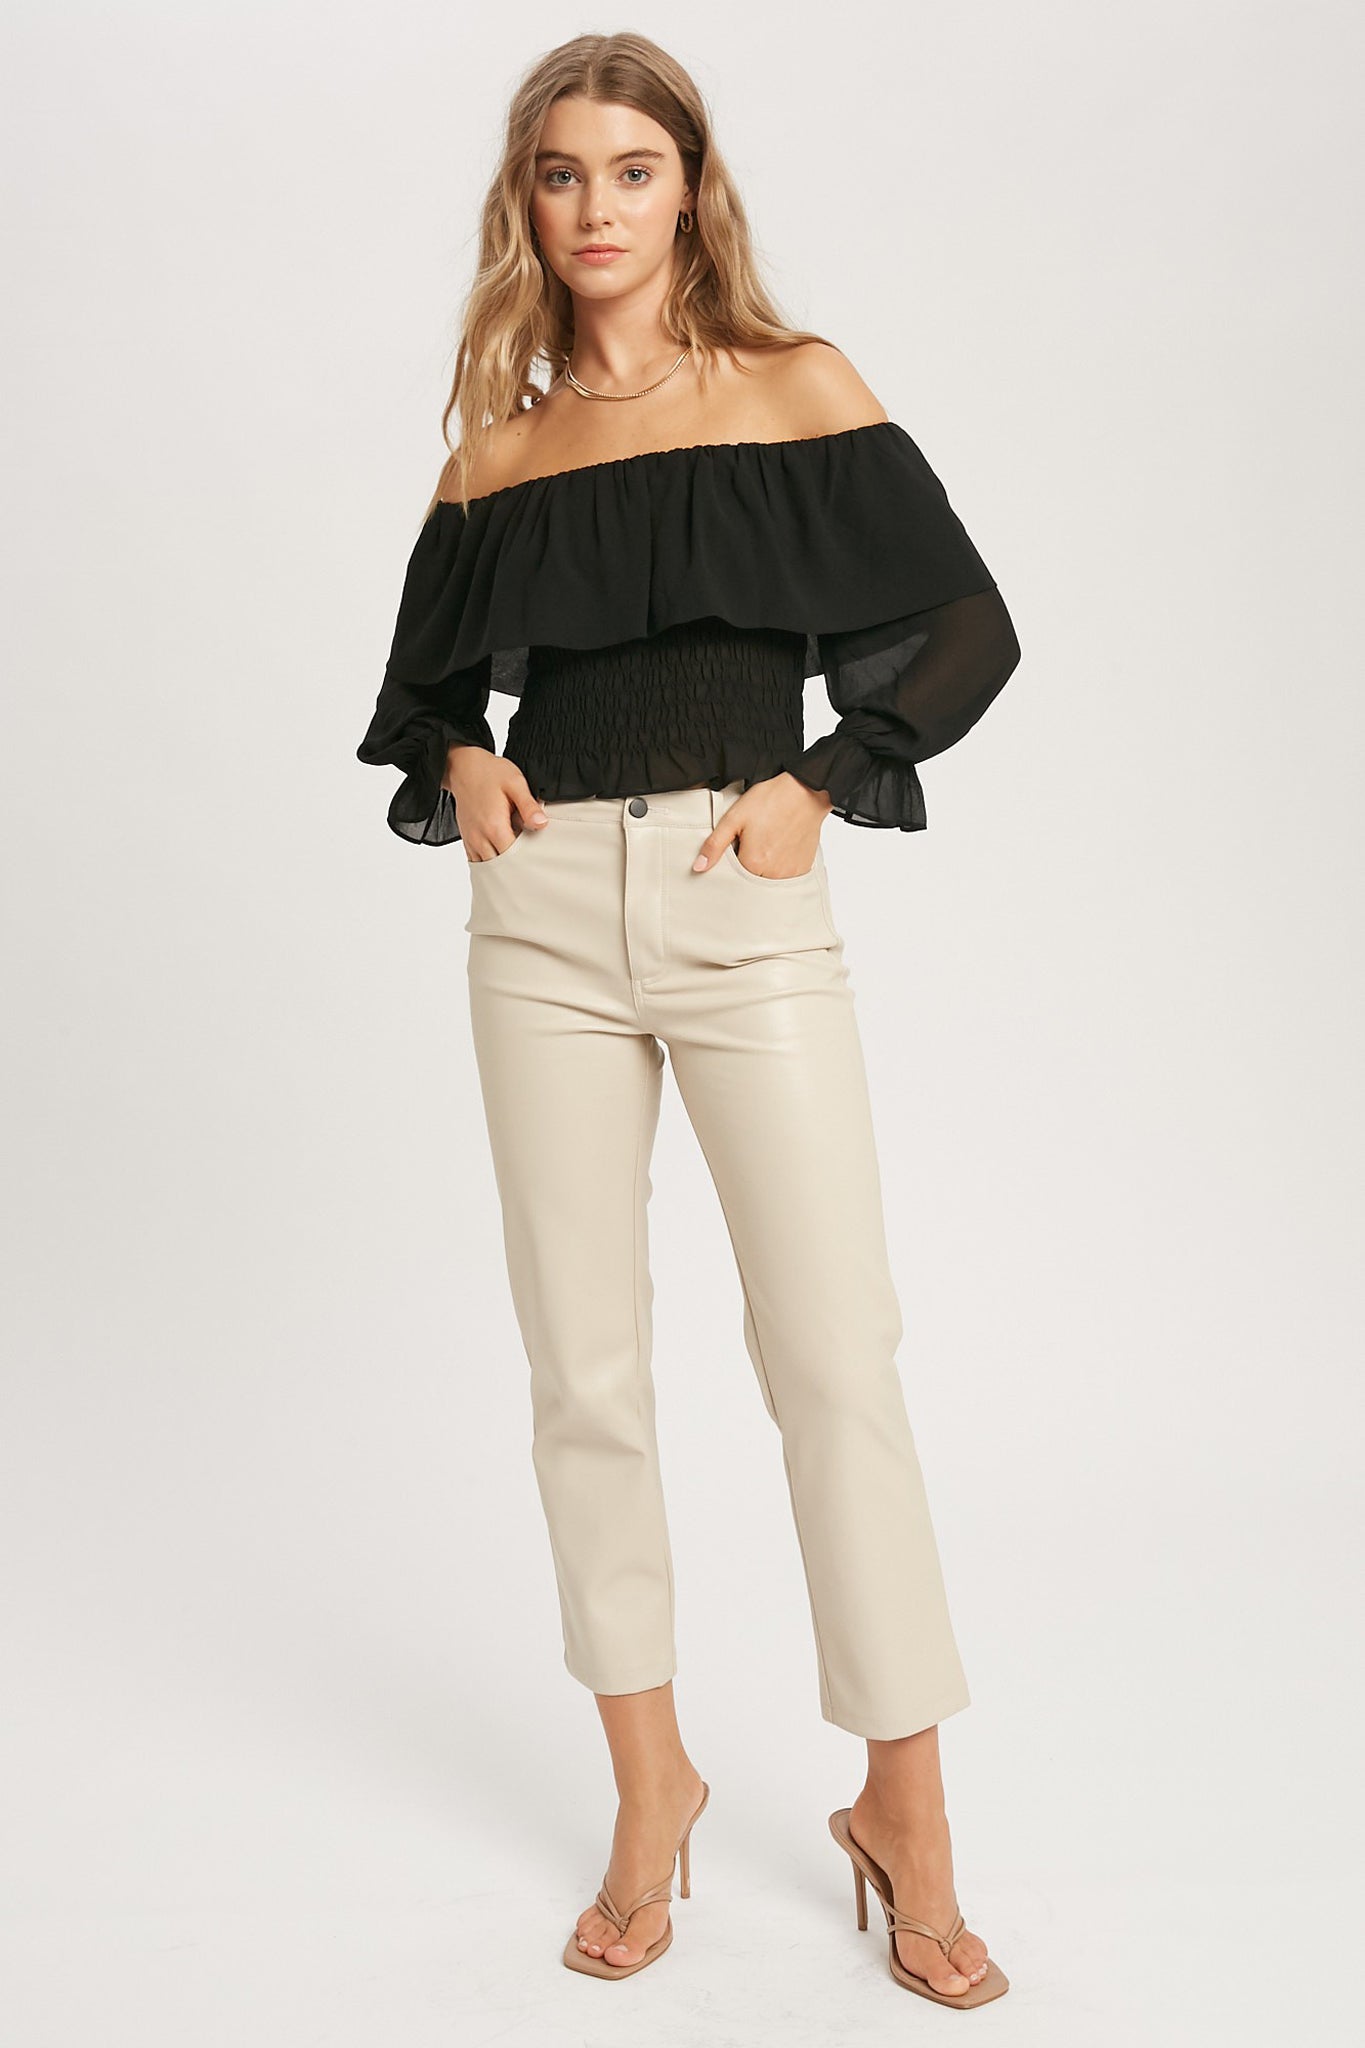 View 6 of Boa Off Shoulder Top, a Tops from Larrea Cove. Detail: .